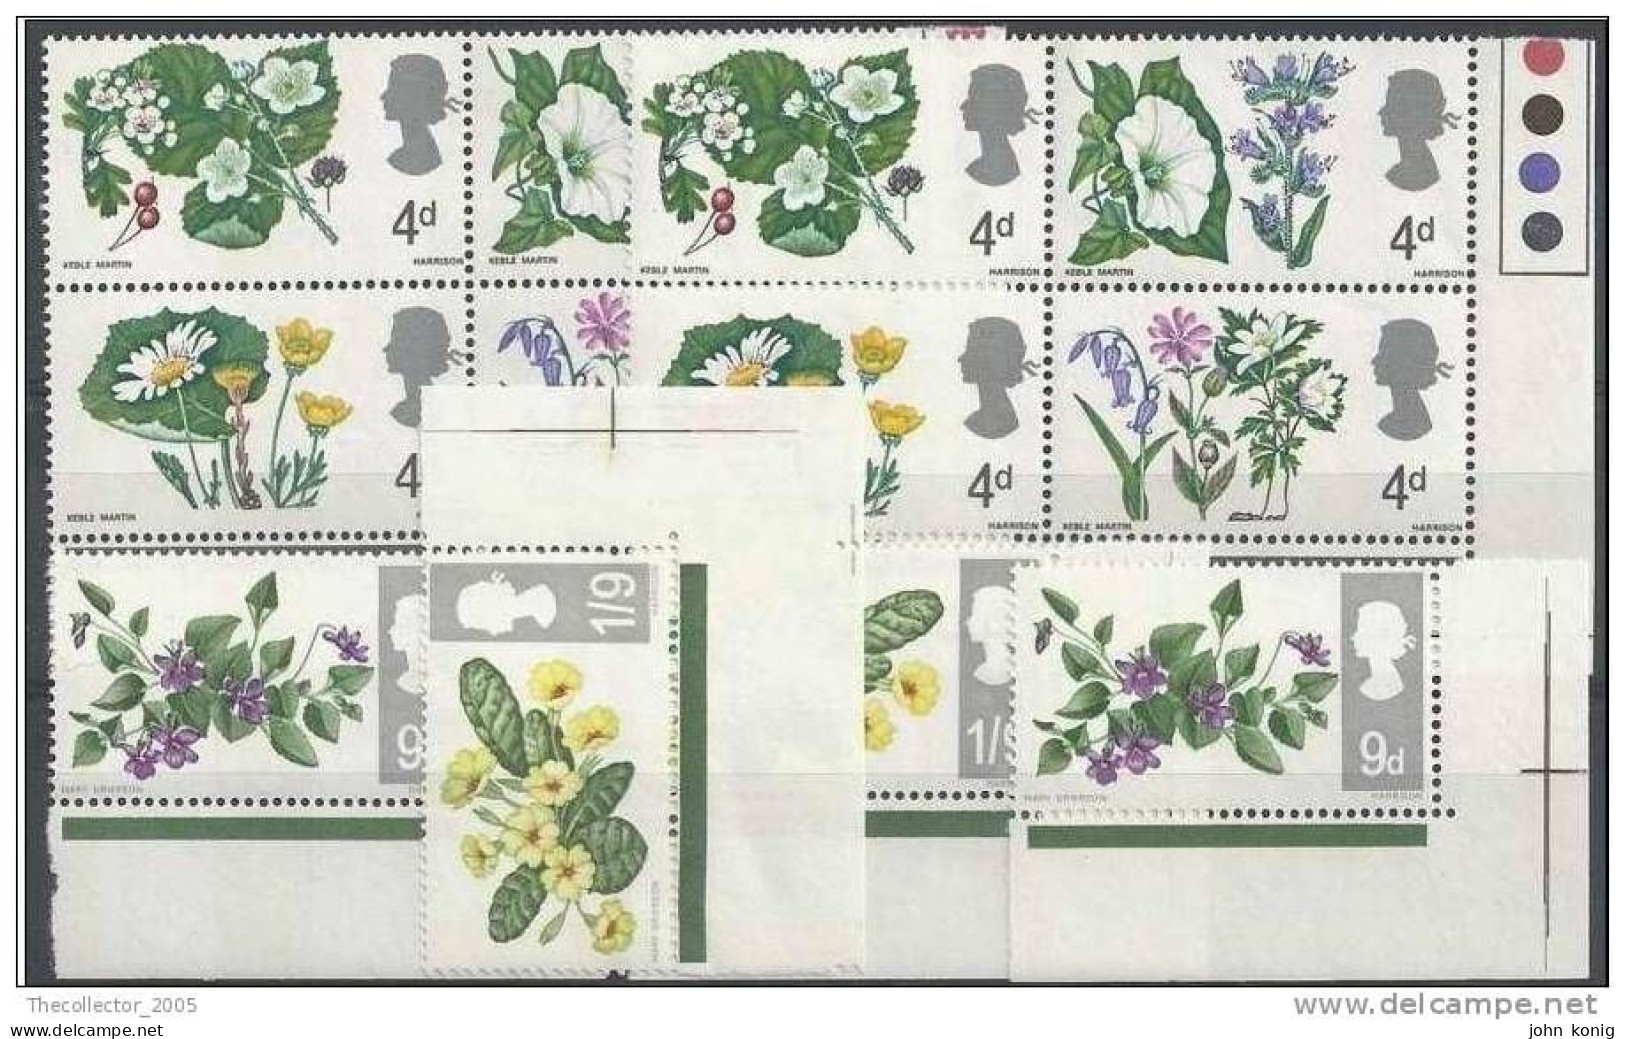 GRAN BRETAGNA - INGHILTERRA - GREAT BRITAIN - ENGLAND - Lotto Di Nuovi - Stamps Lot New-mint ( Flowers) - Collections